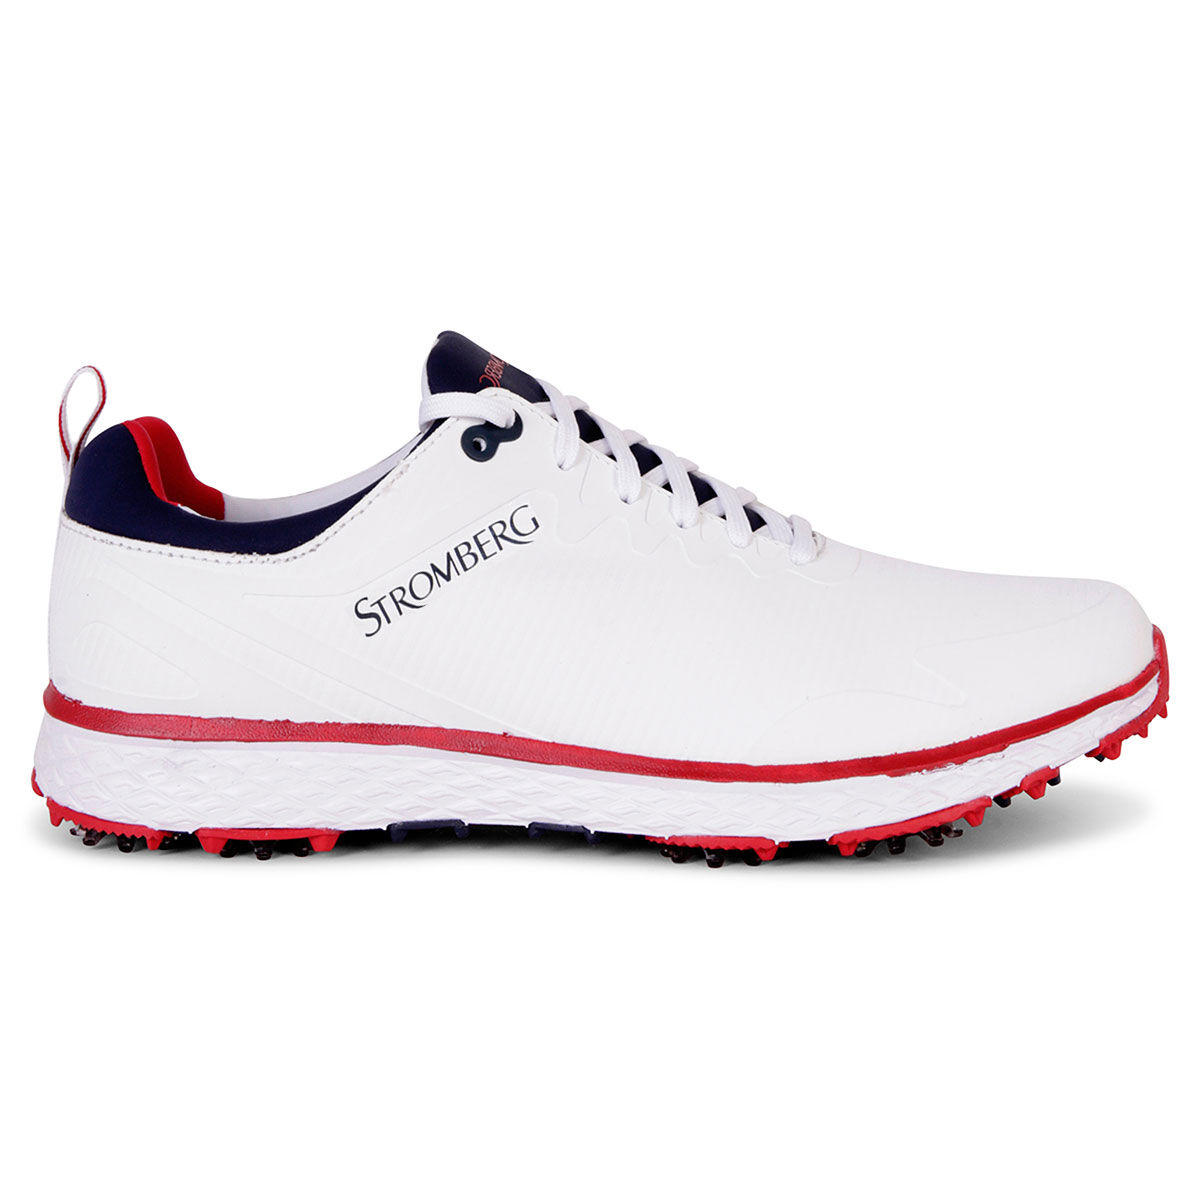 Chaussures Stromberg Tempo Spiked, homme, White/navy/red, 7  | Online Golf